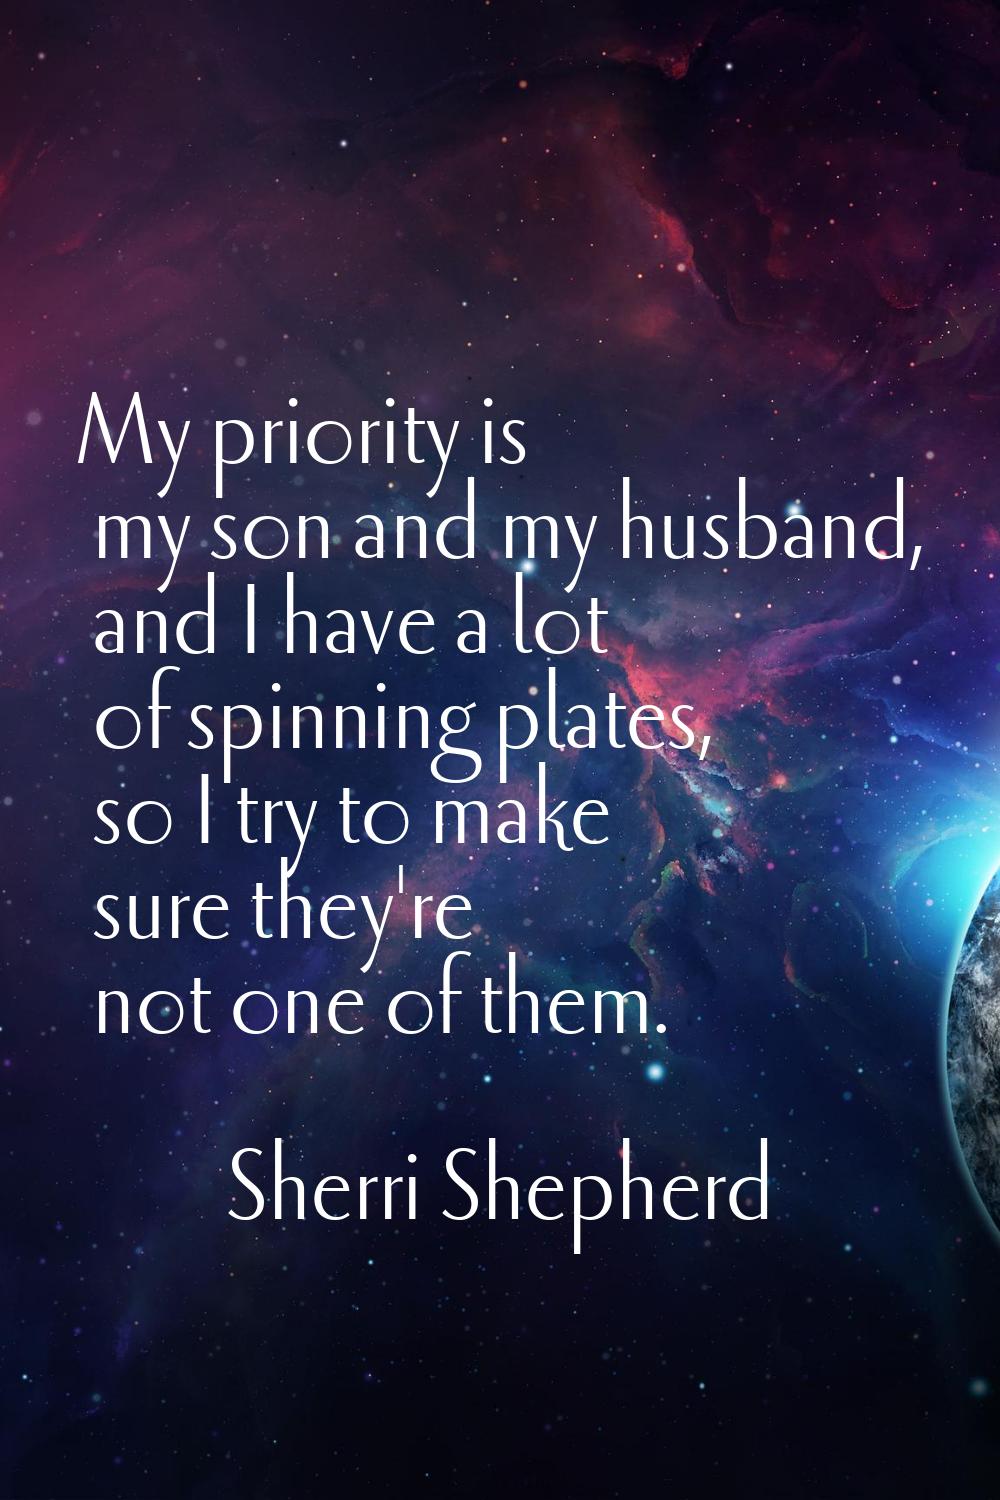 My priority is my son and my husband, and I have a lot of spinning plates, so I try to make sure th